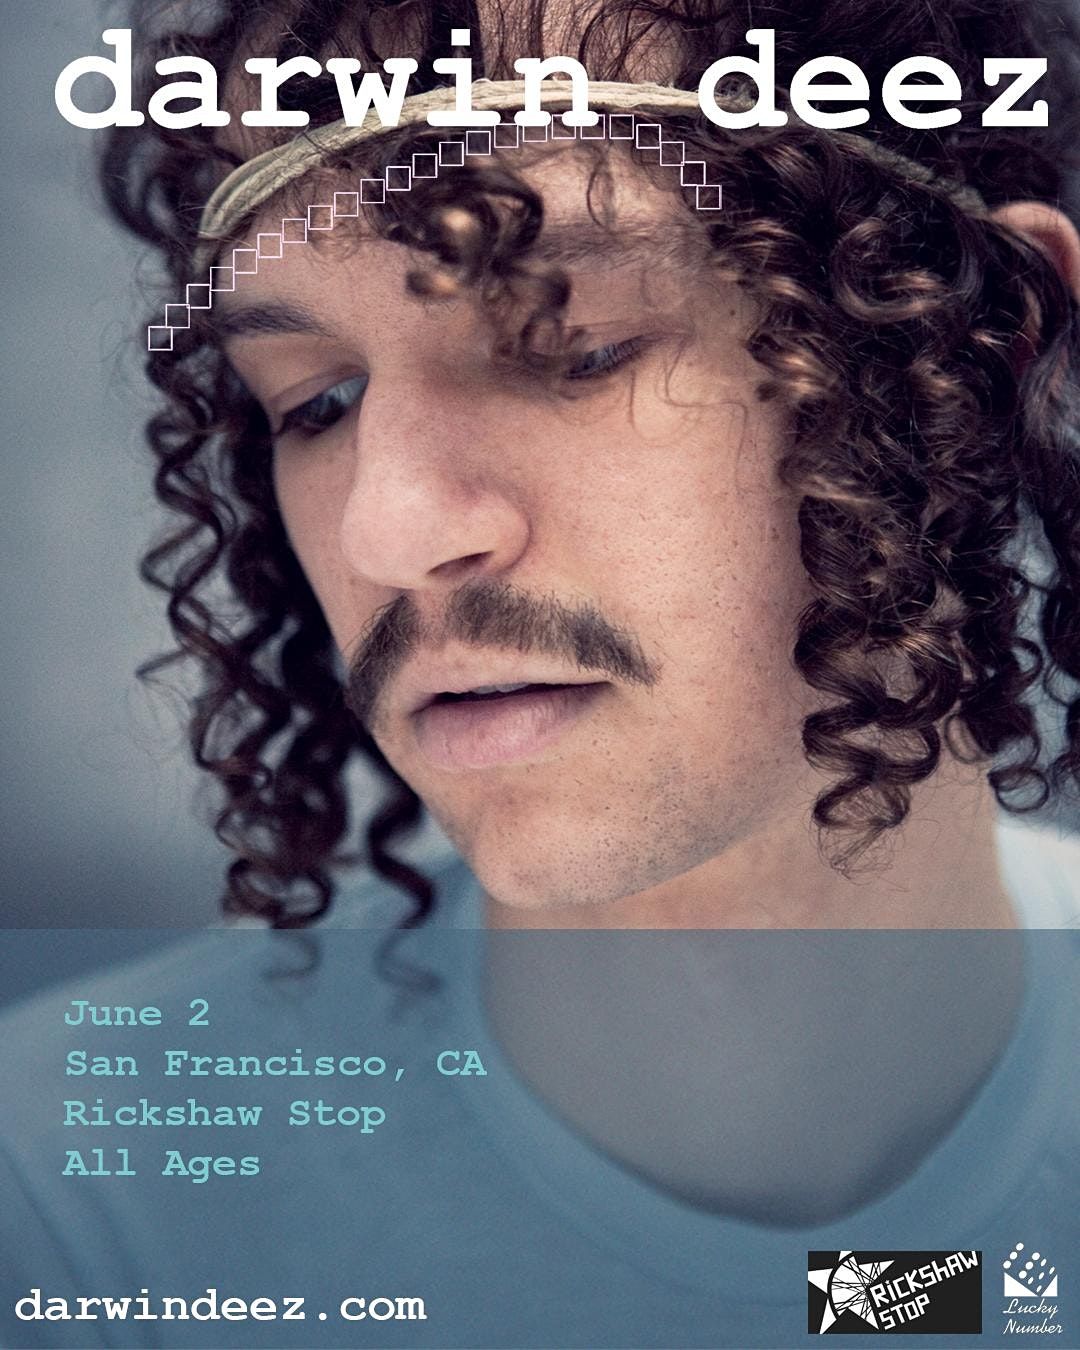 DARWIN DEEZ's 10 Year Anniversary Tour for his self-titled debut album!